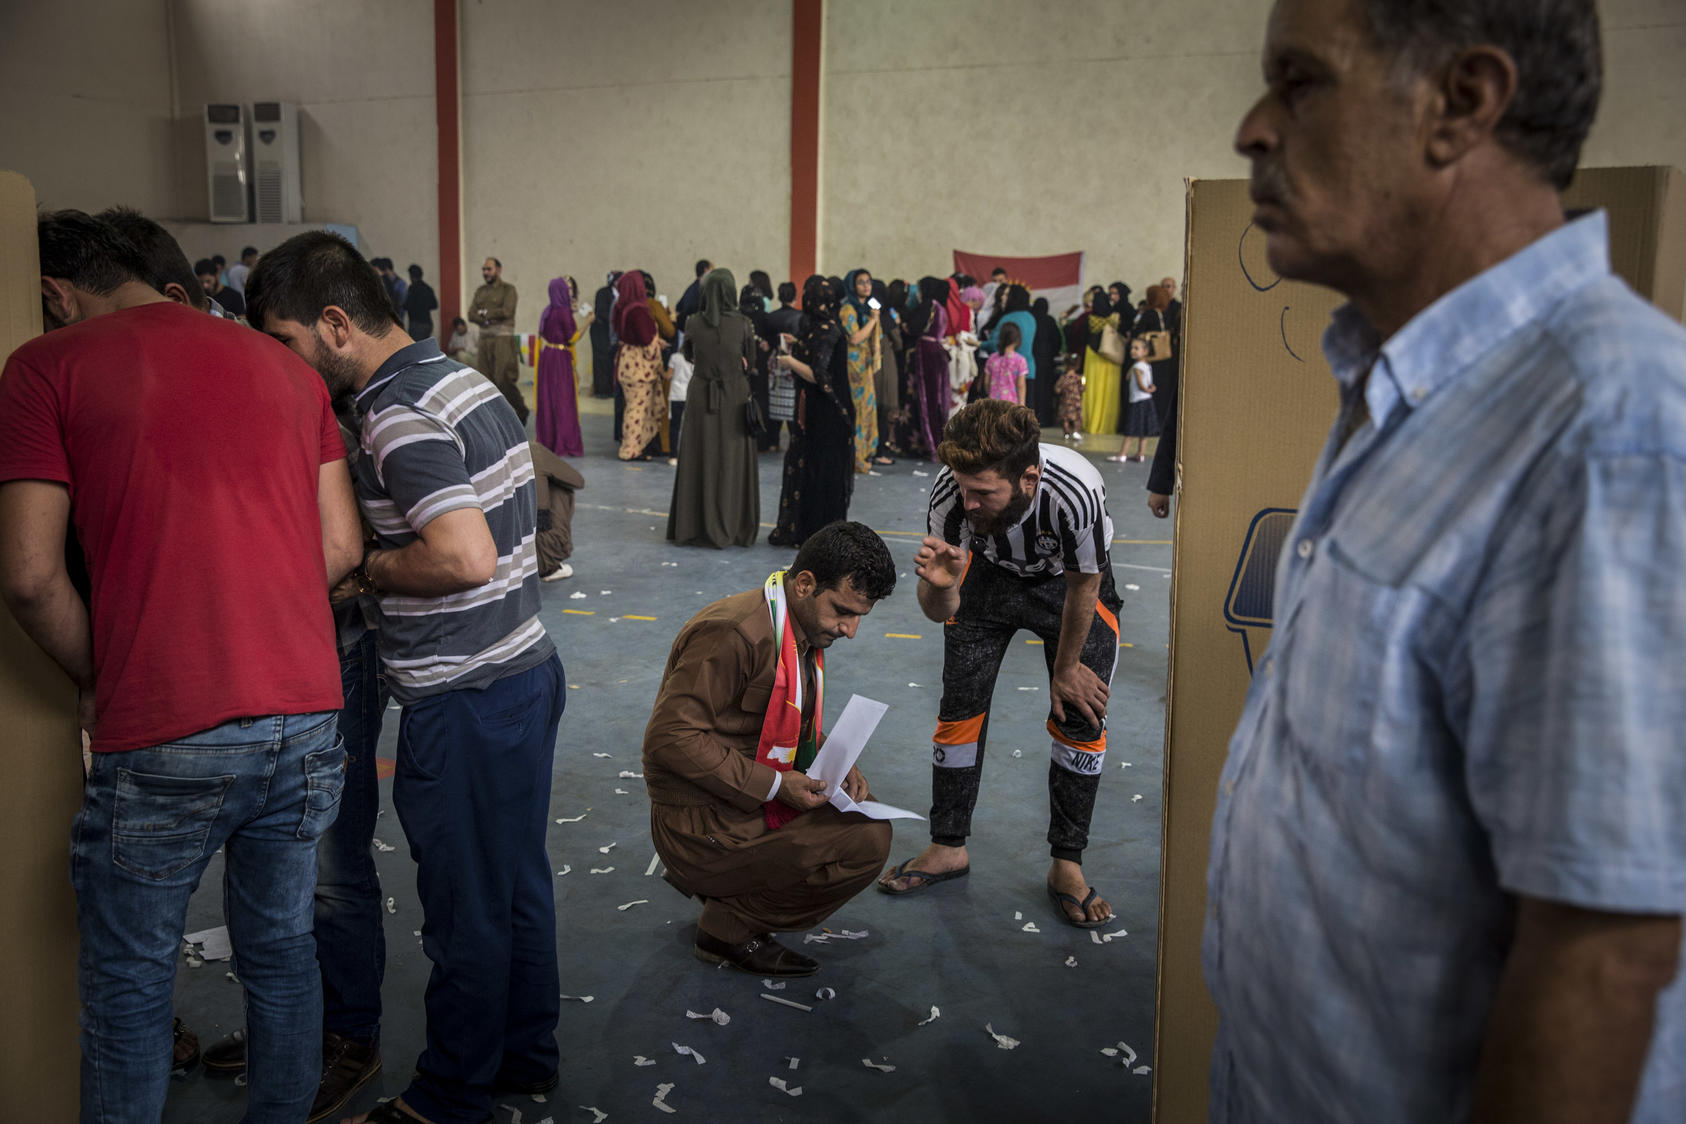 People vote in a referendum on independence, in a sports hall set up at a voting center in Erbil, Iraq, Sept. 25, 2017. Photo Courtesy of The New York Times/Ivor Prickett